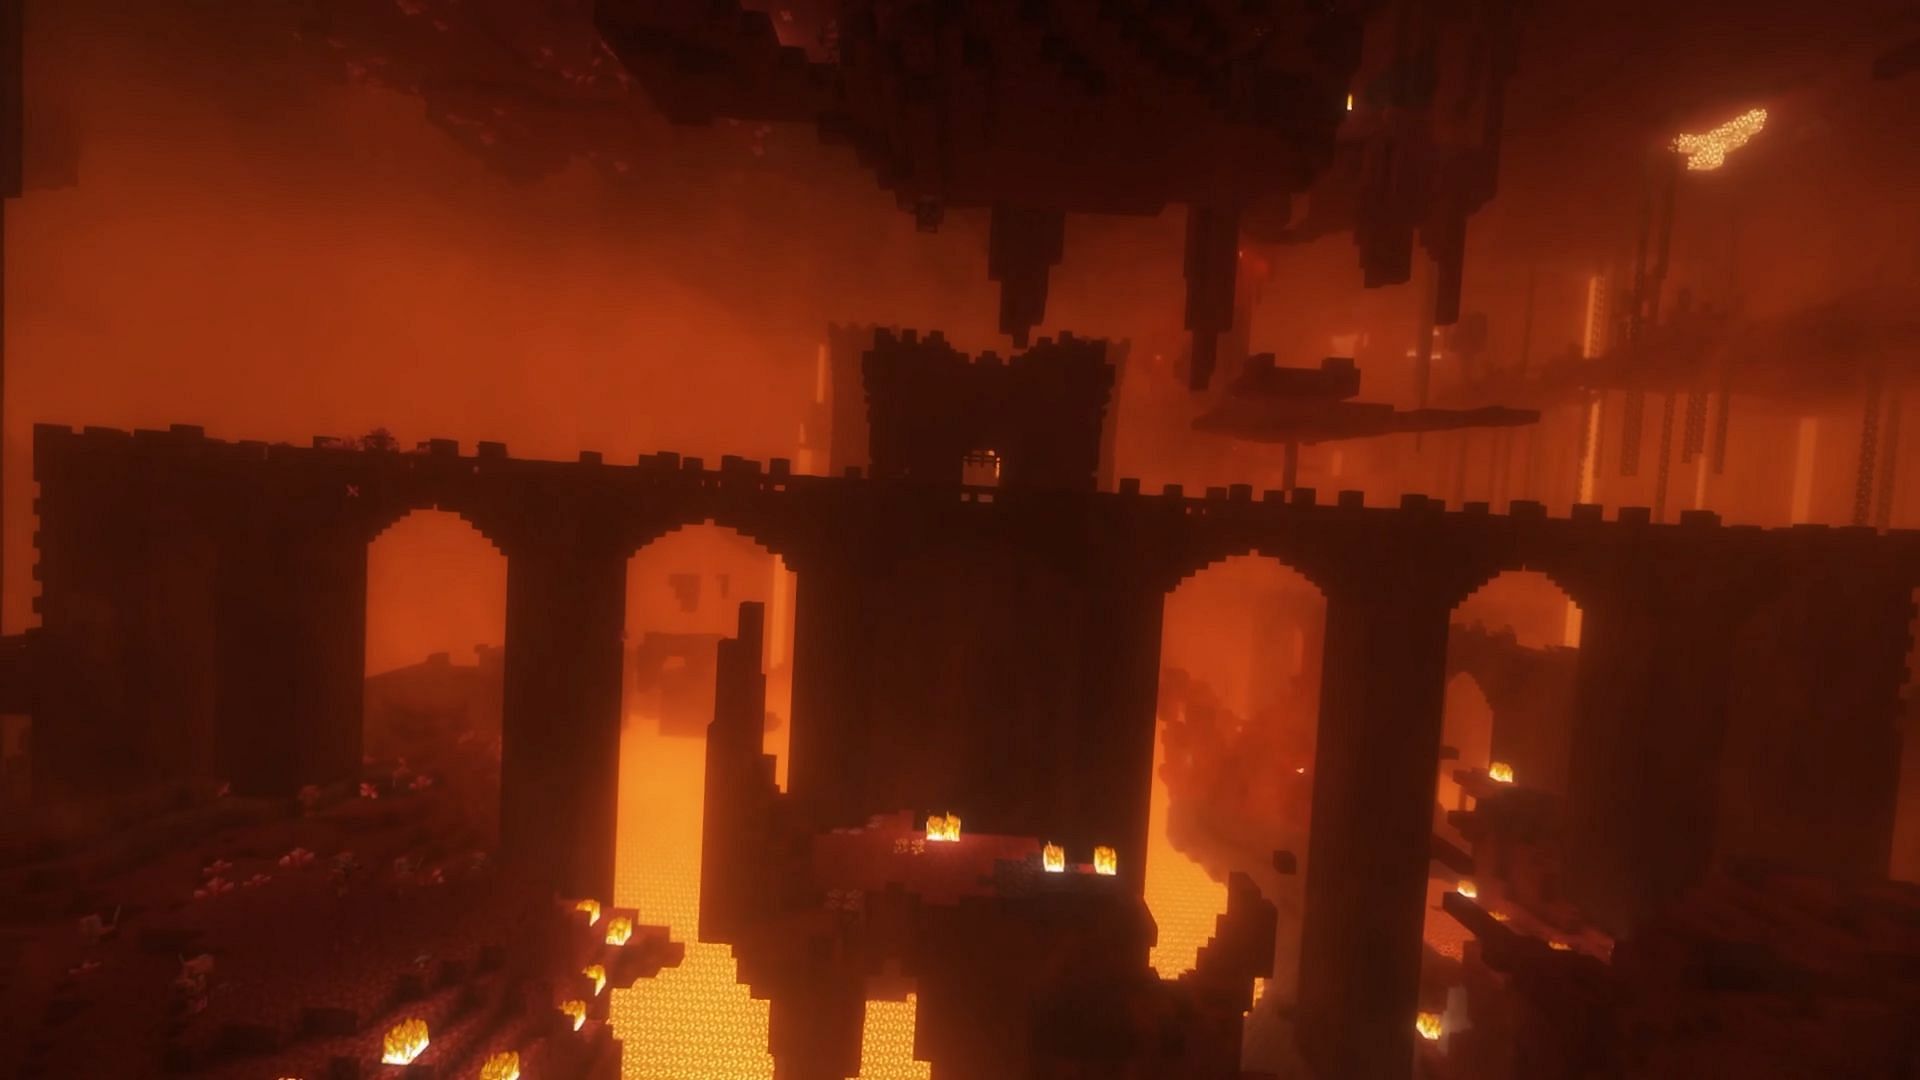 A Nether fortress in the Better MC modpack (Image via SHXRKIE/CurseForge)